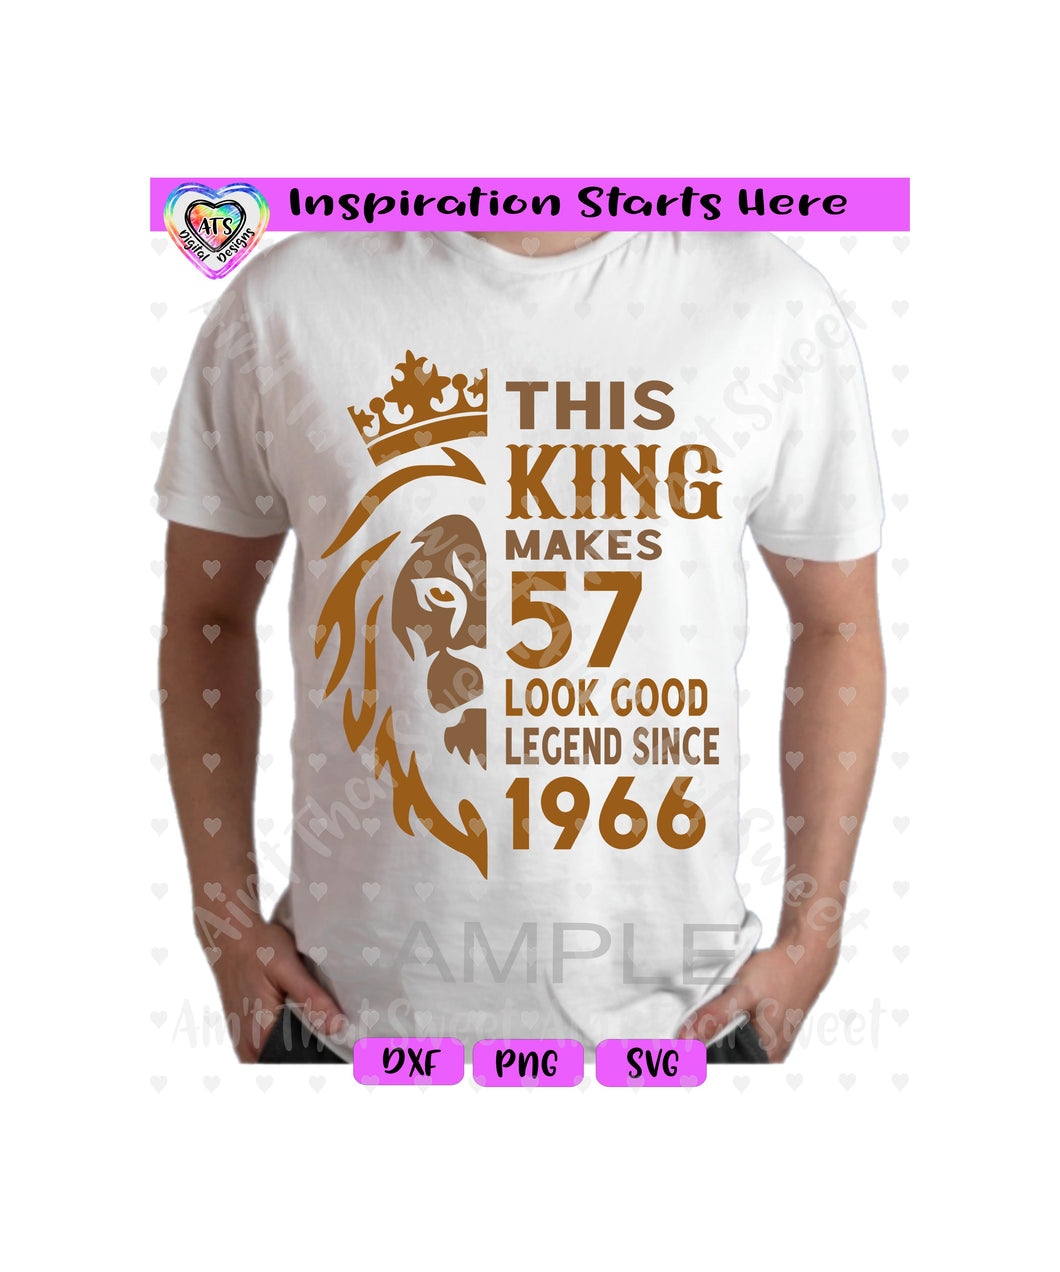 This King Makes 57 Look Good | Legend Since 1966 (Based on 2023) | Crown | Lion - Transparent PNG SVG DXF - Silhouette, Cricut, ScanNCut